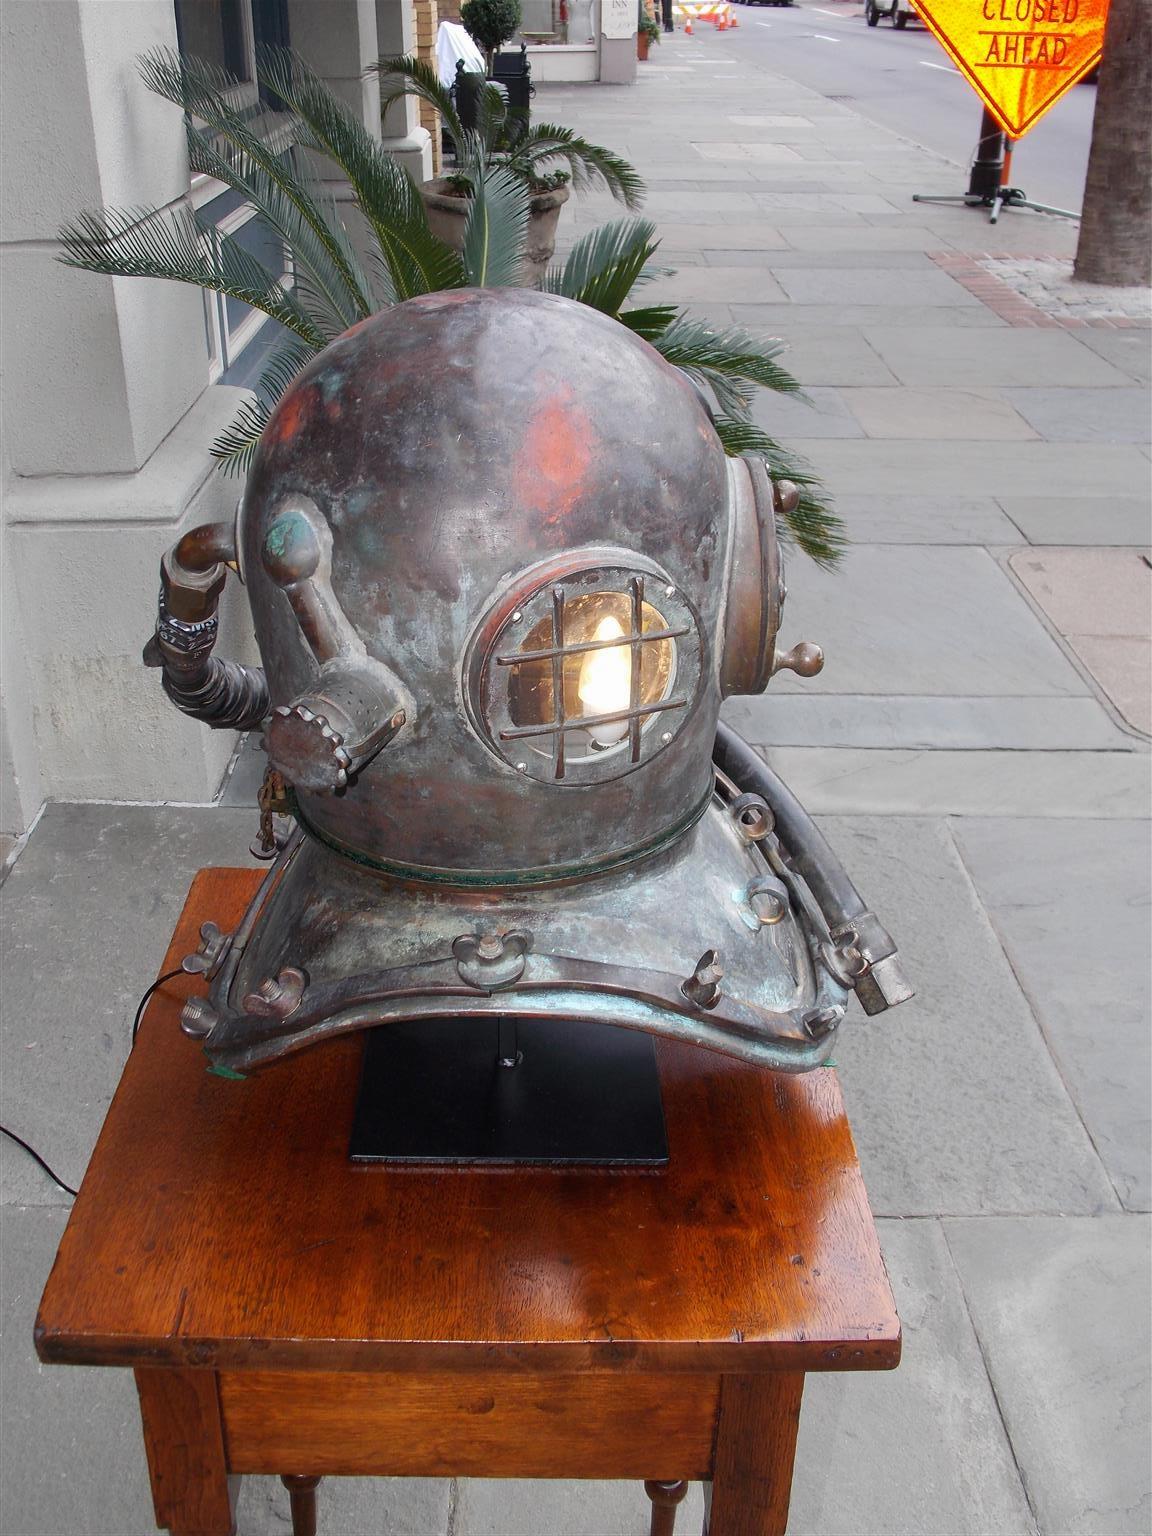 Mid-20th Century American Maritime Copper and Brass Deep Sea Divers Helmet on Stand, NY C. 1930 For Sale